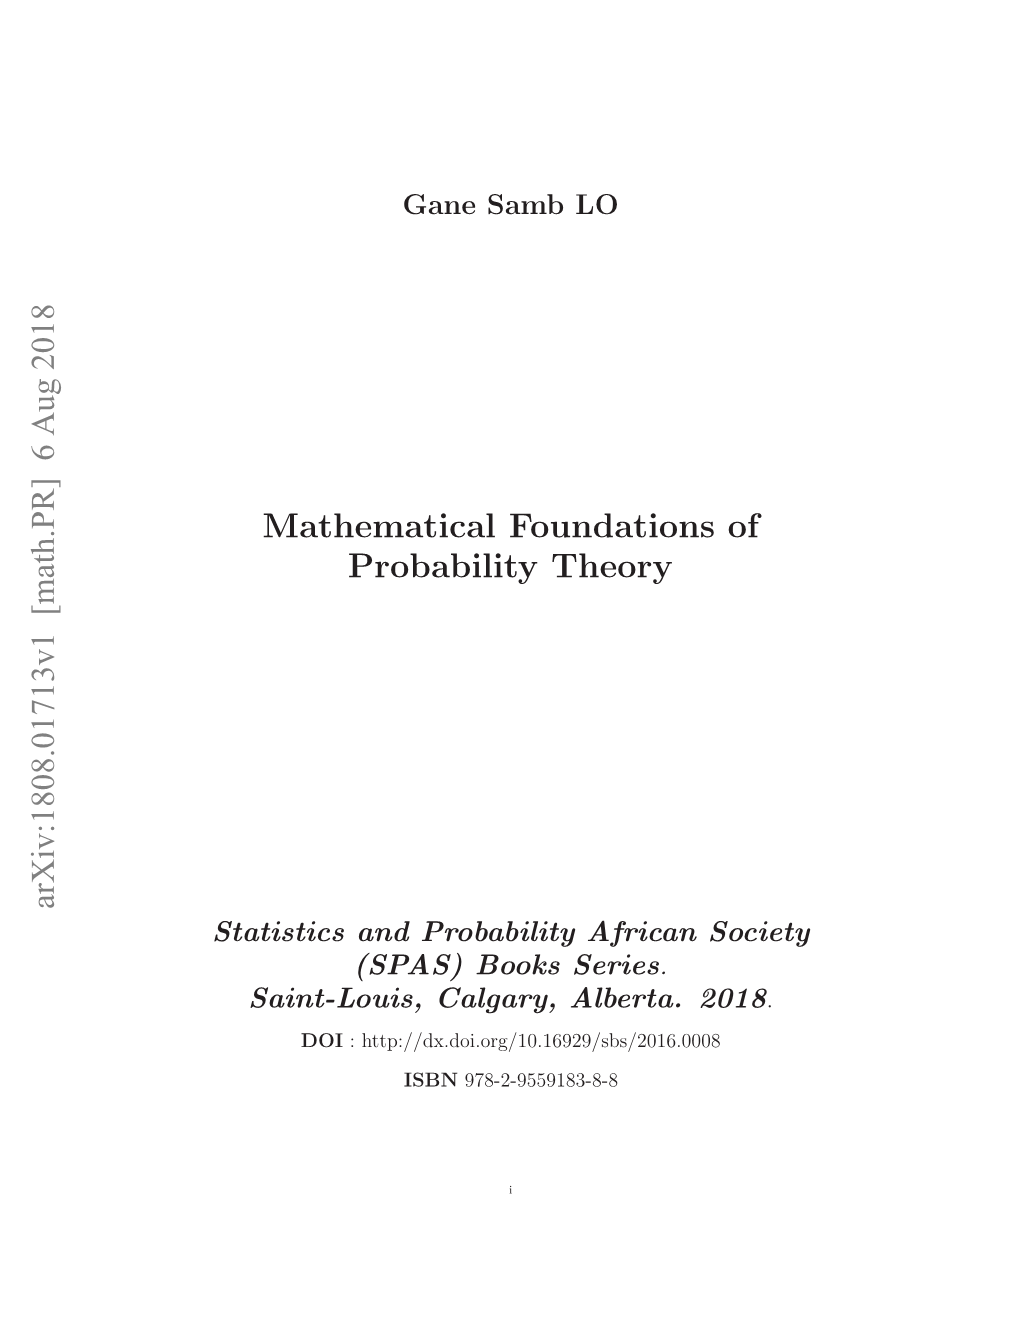 [Math.PR] 6 Aug 2018 Mathematical Foundations of Probability Theory